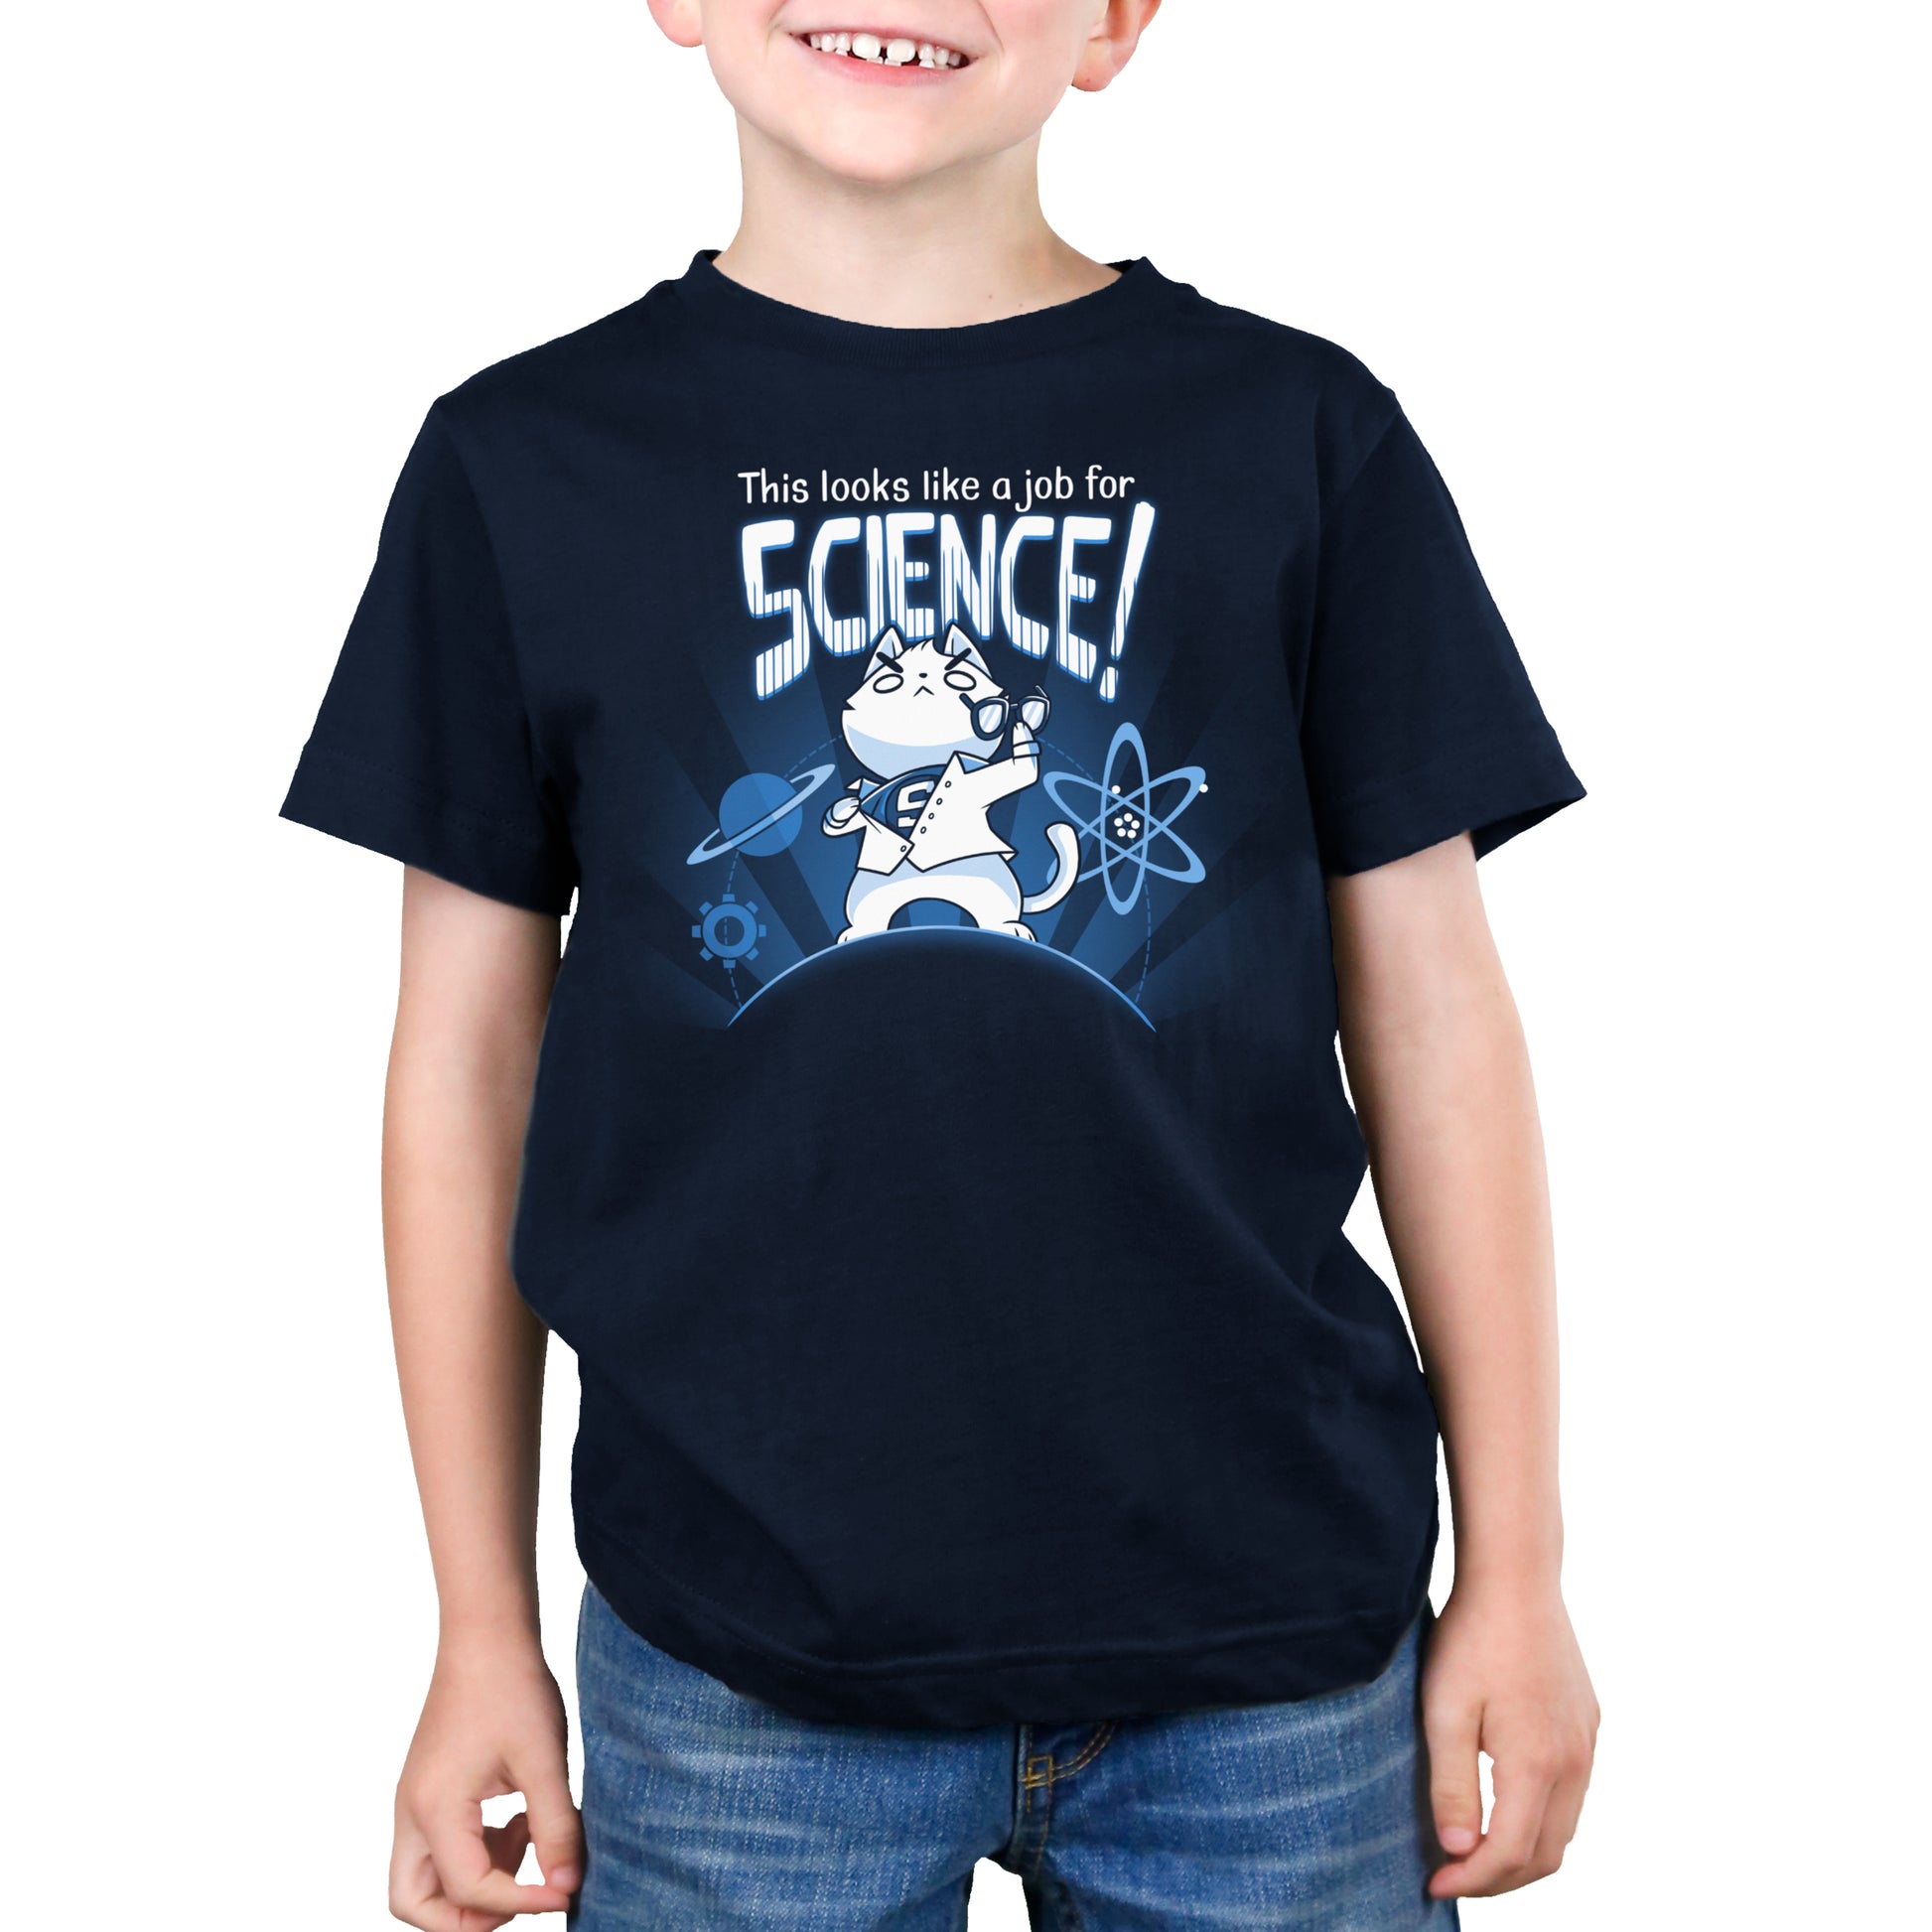 A young boy in a TeeTurtle "This Looks Like a Job for Science" t-shirt.